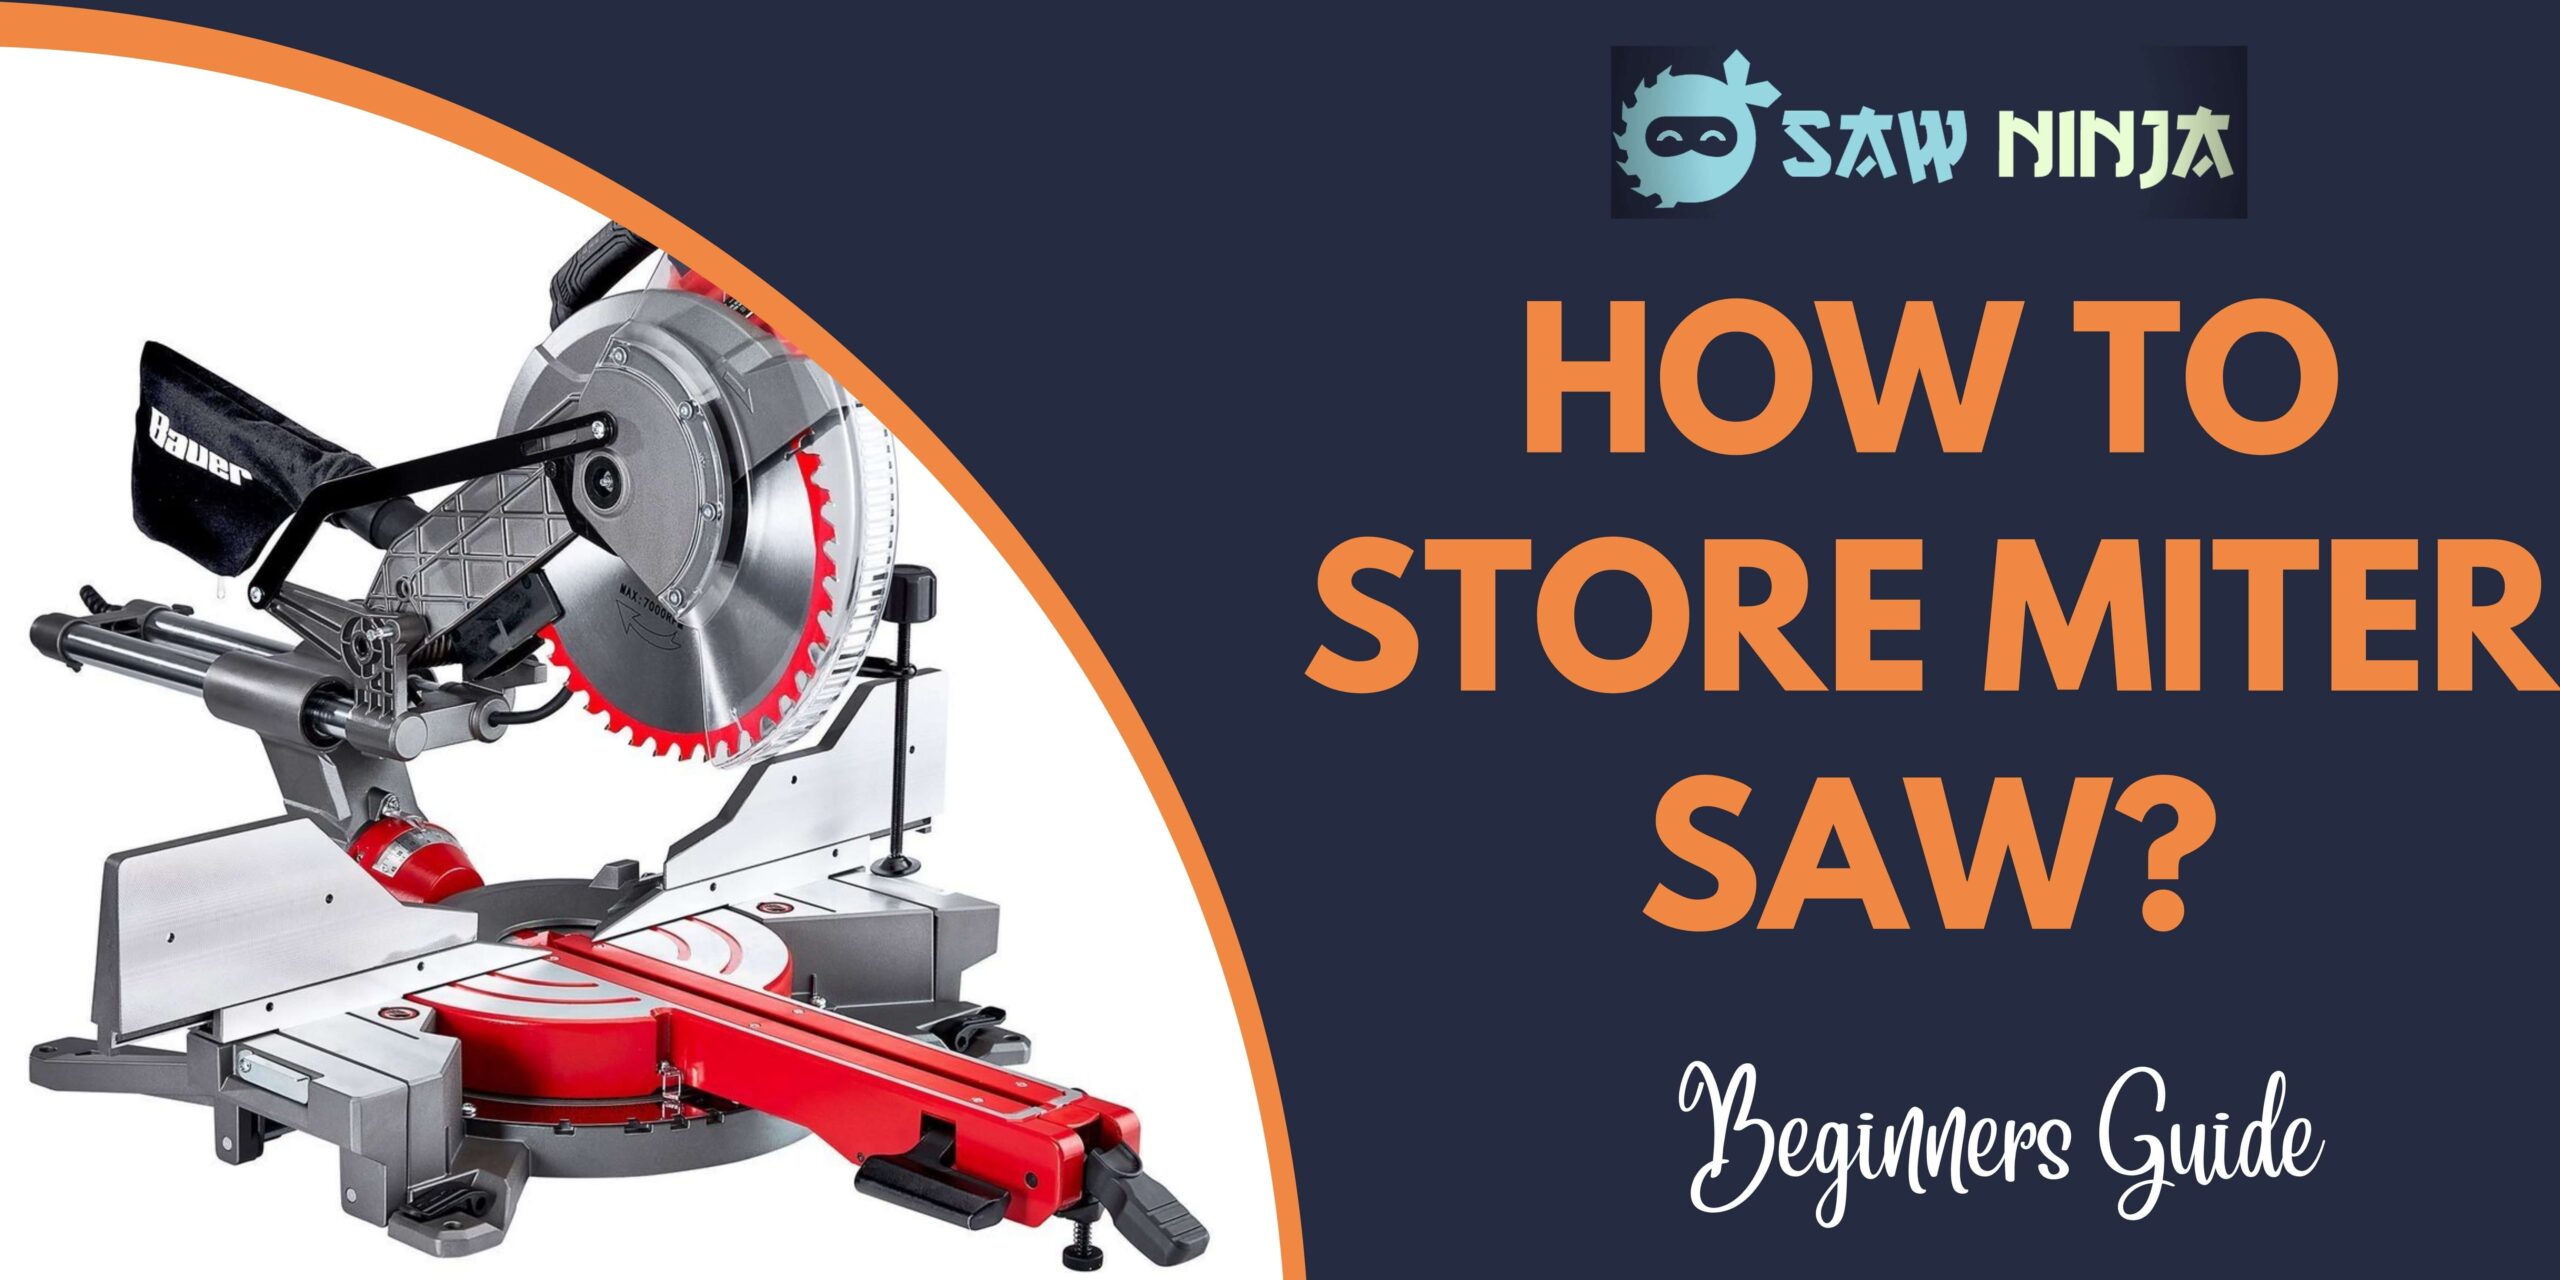 How To Store Miter Saw